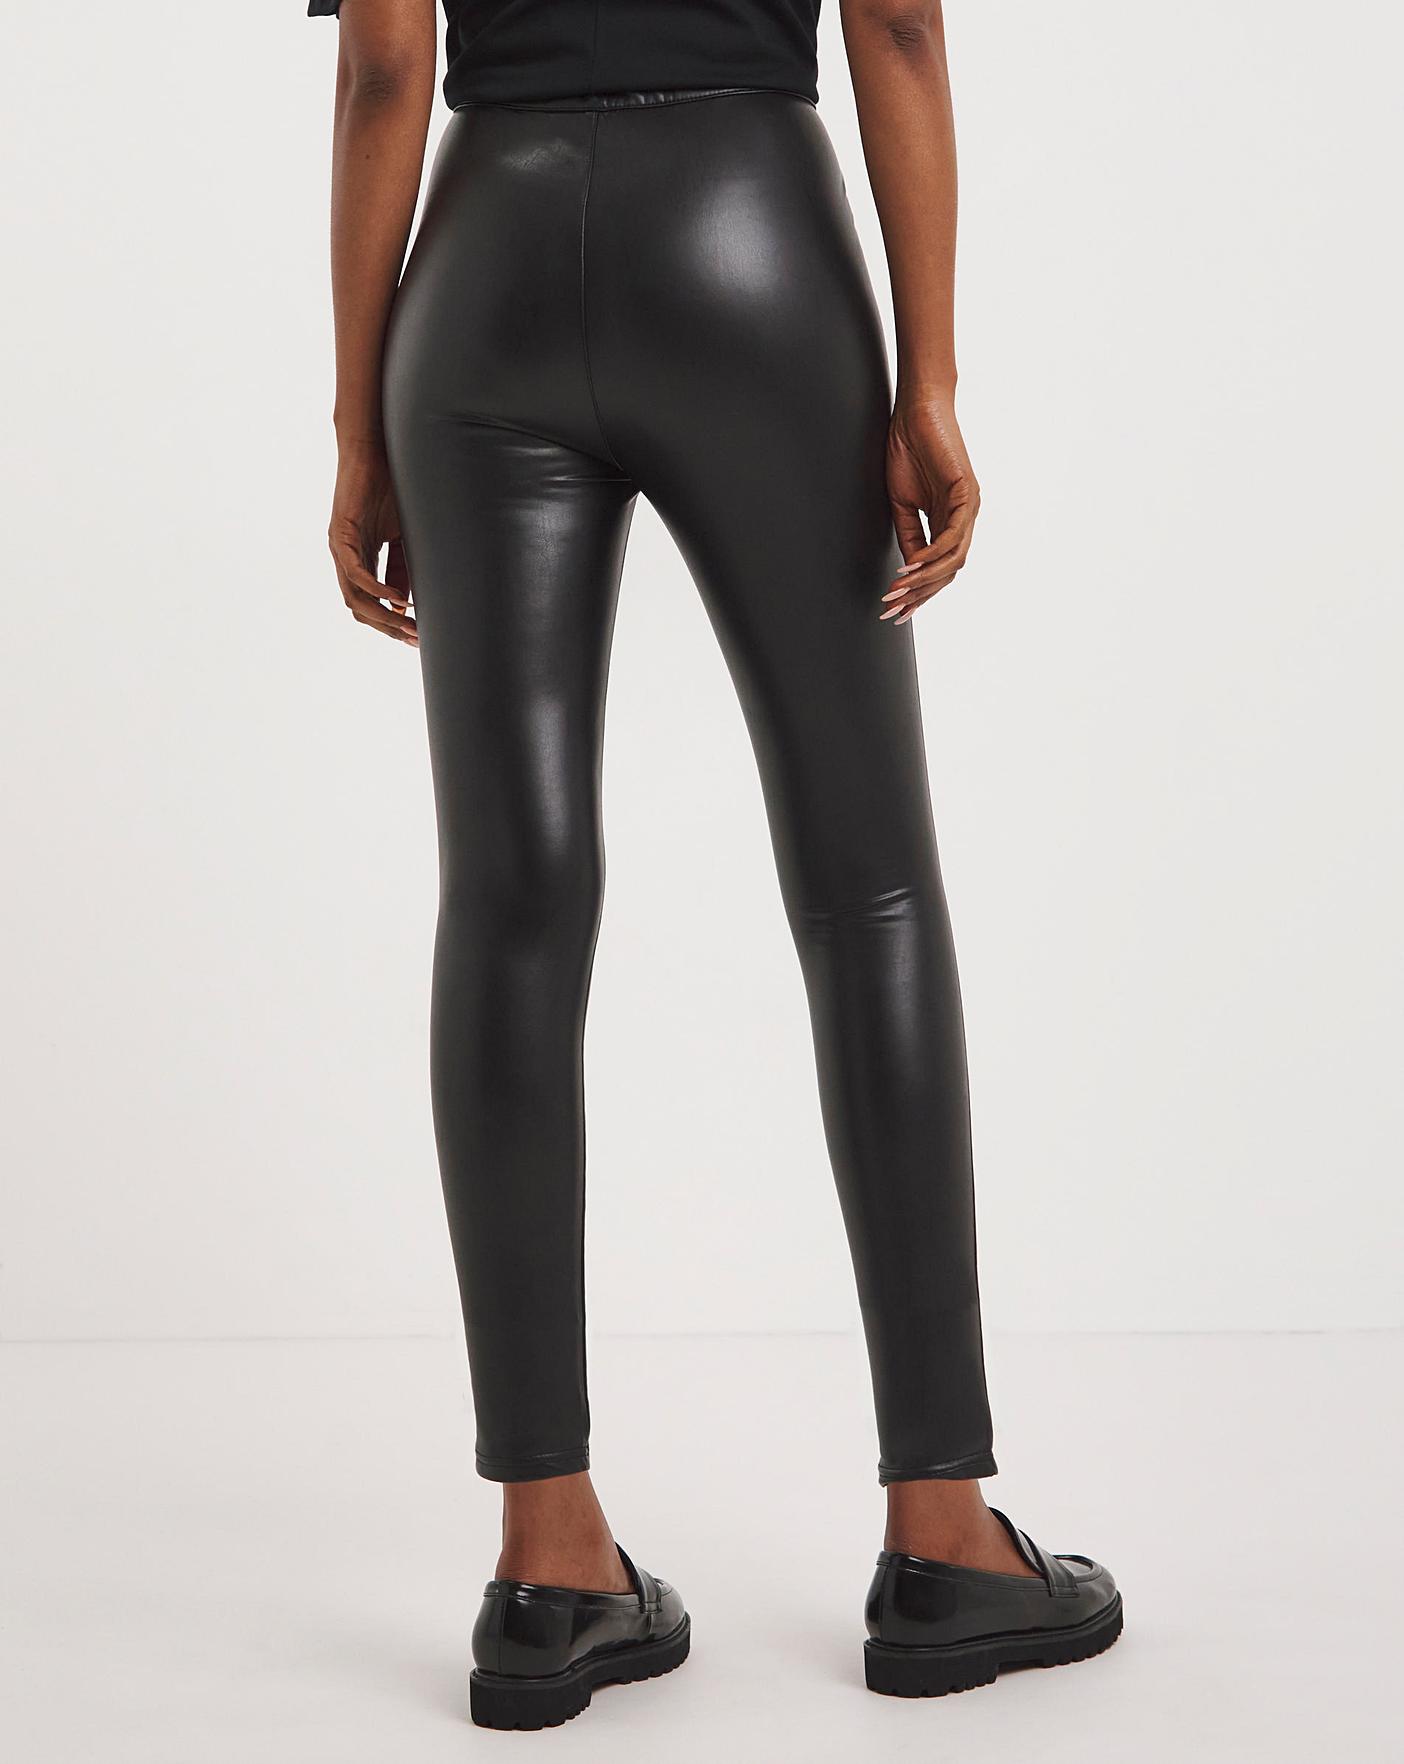 Black Leggings with Cosy Touch Lining | J D Williams